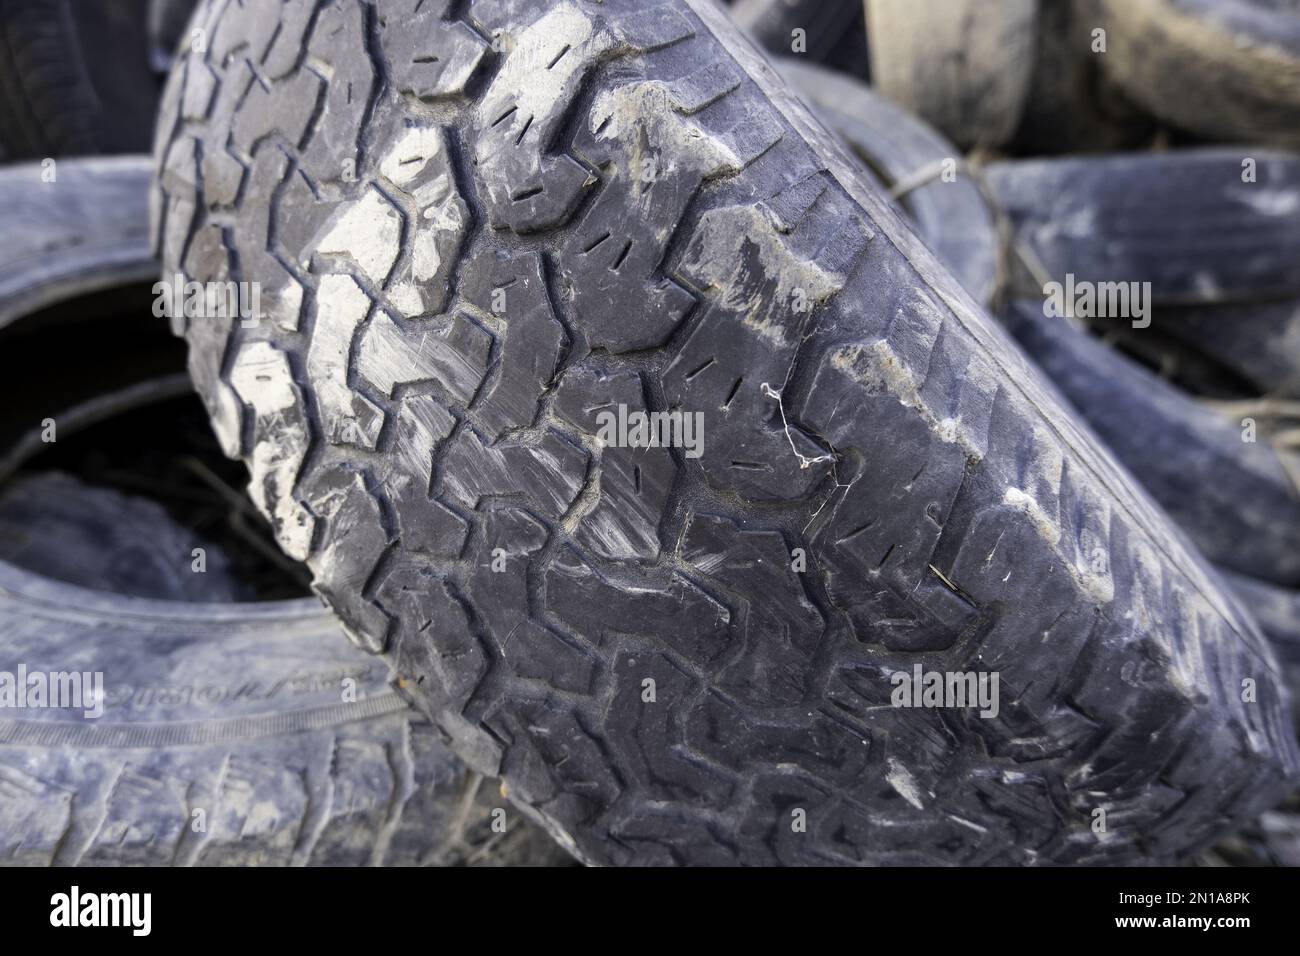 Detail of damaged and broken car tires, environmental pollution Stock Photo